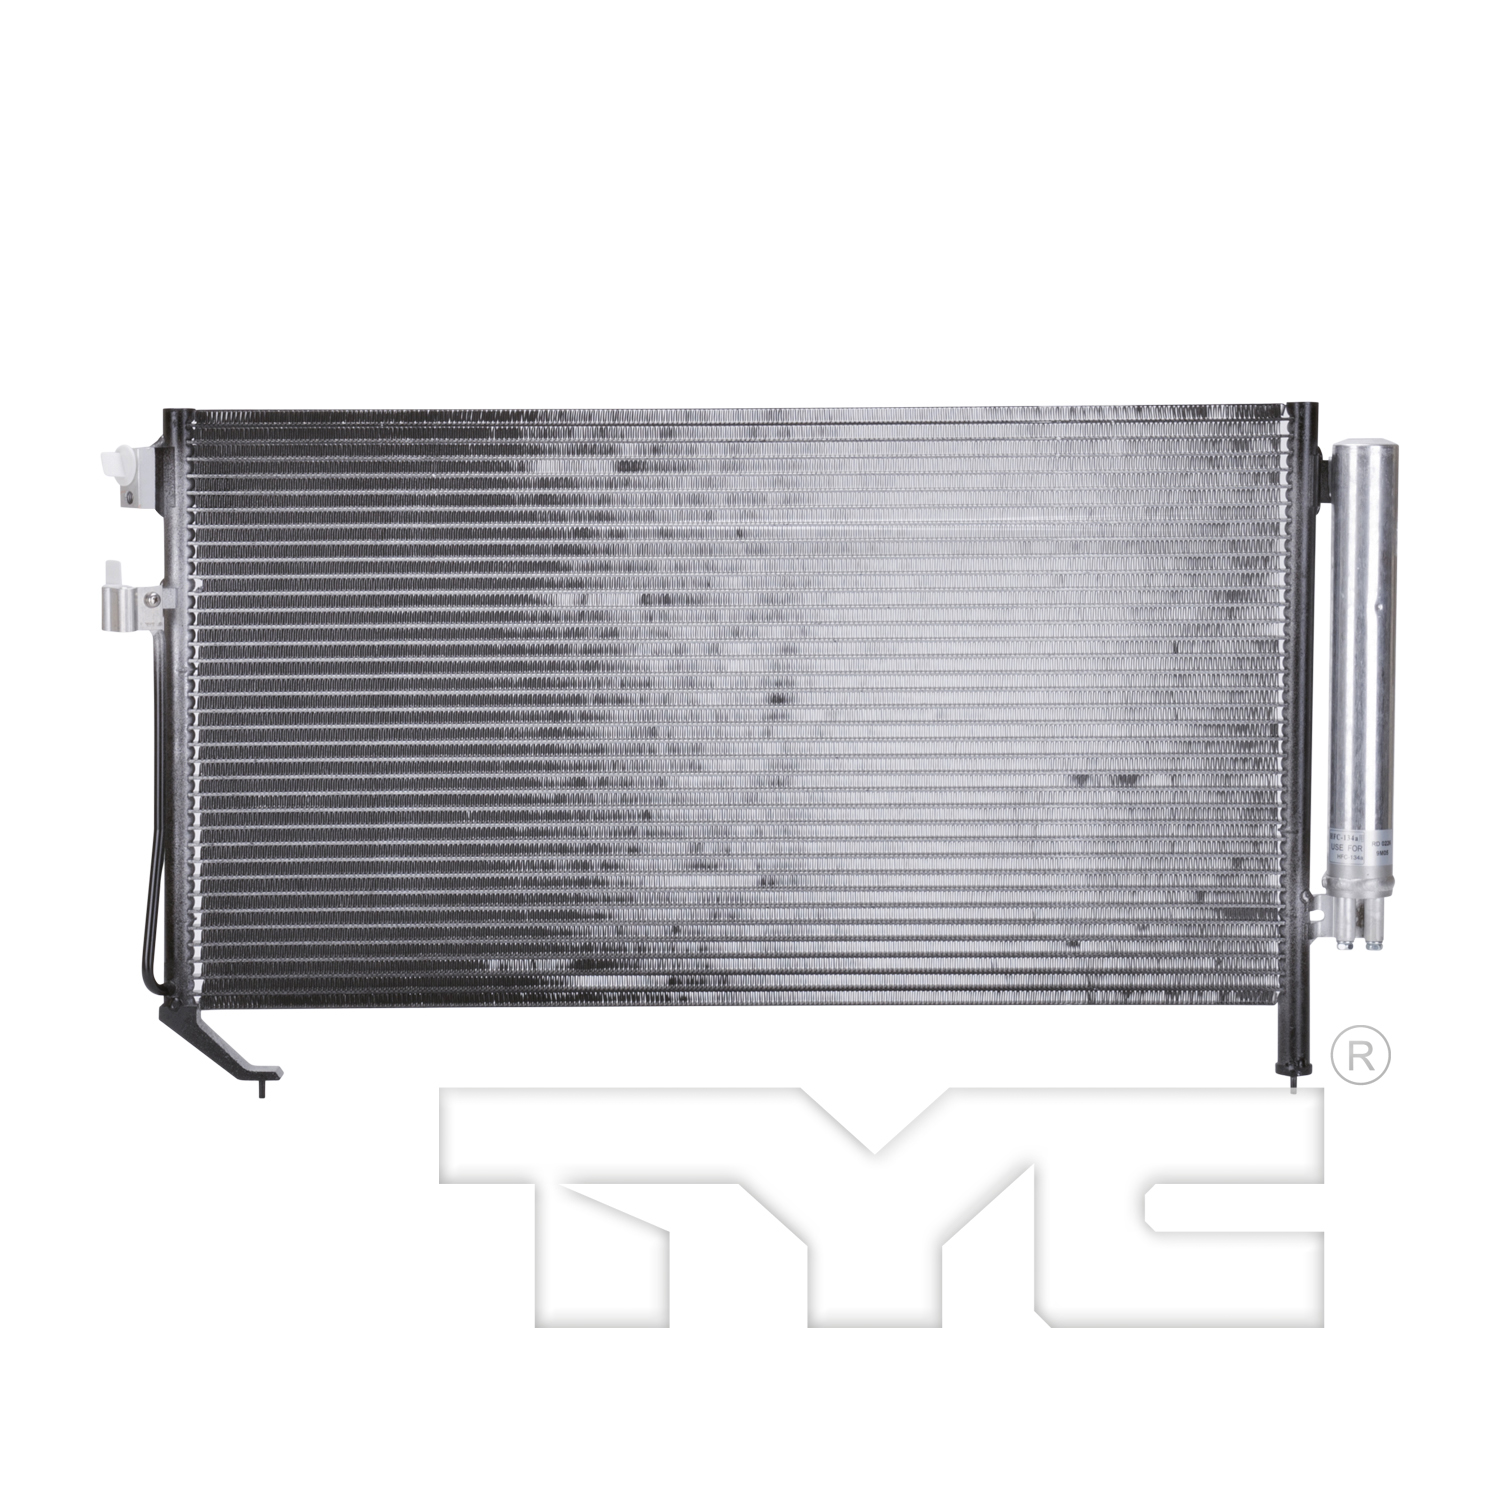 Aftermarket AC CONDENSERS for SUBARU - FORESTER, FORESTER,03-08,Air conditioning condenser